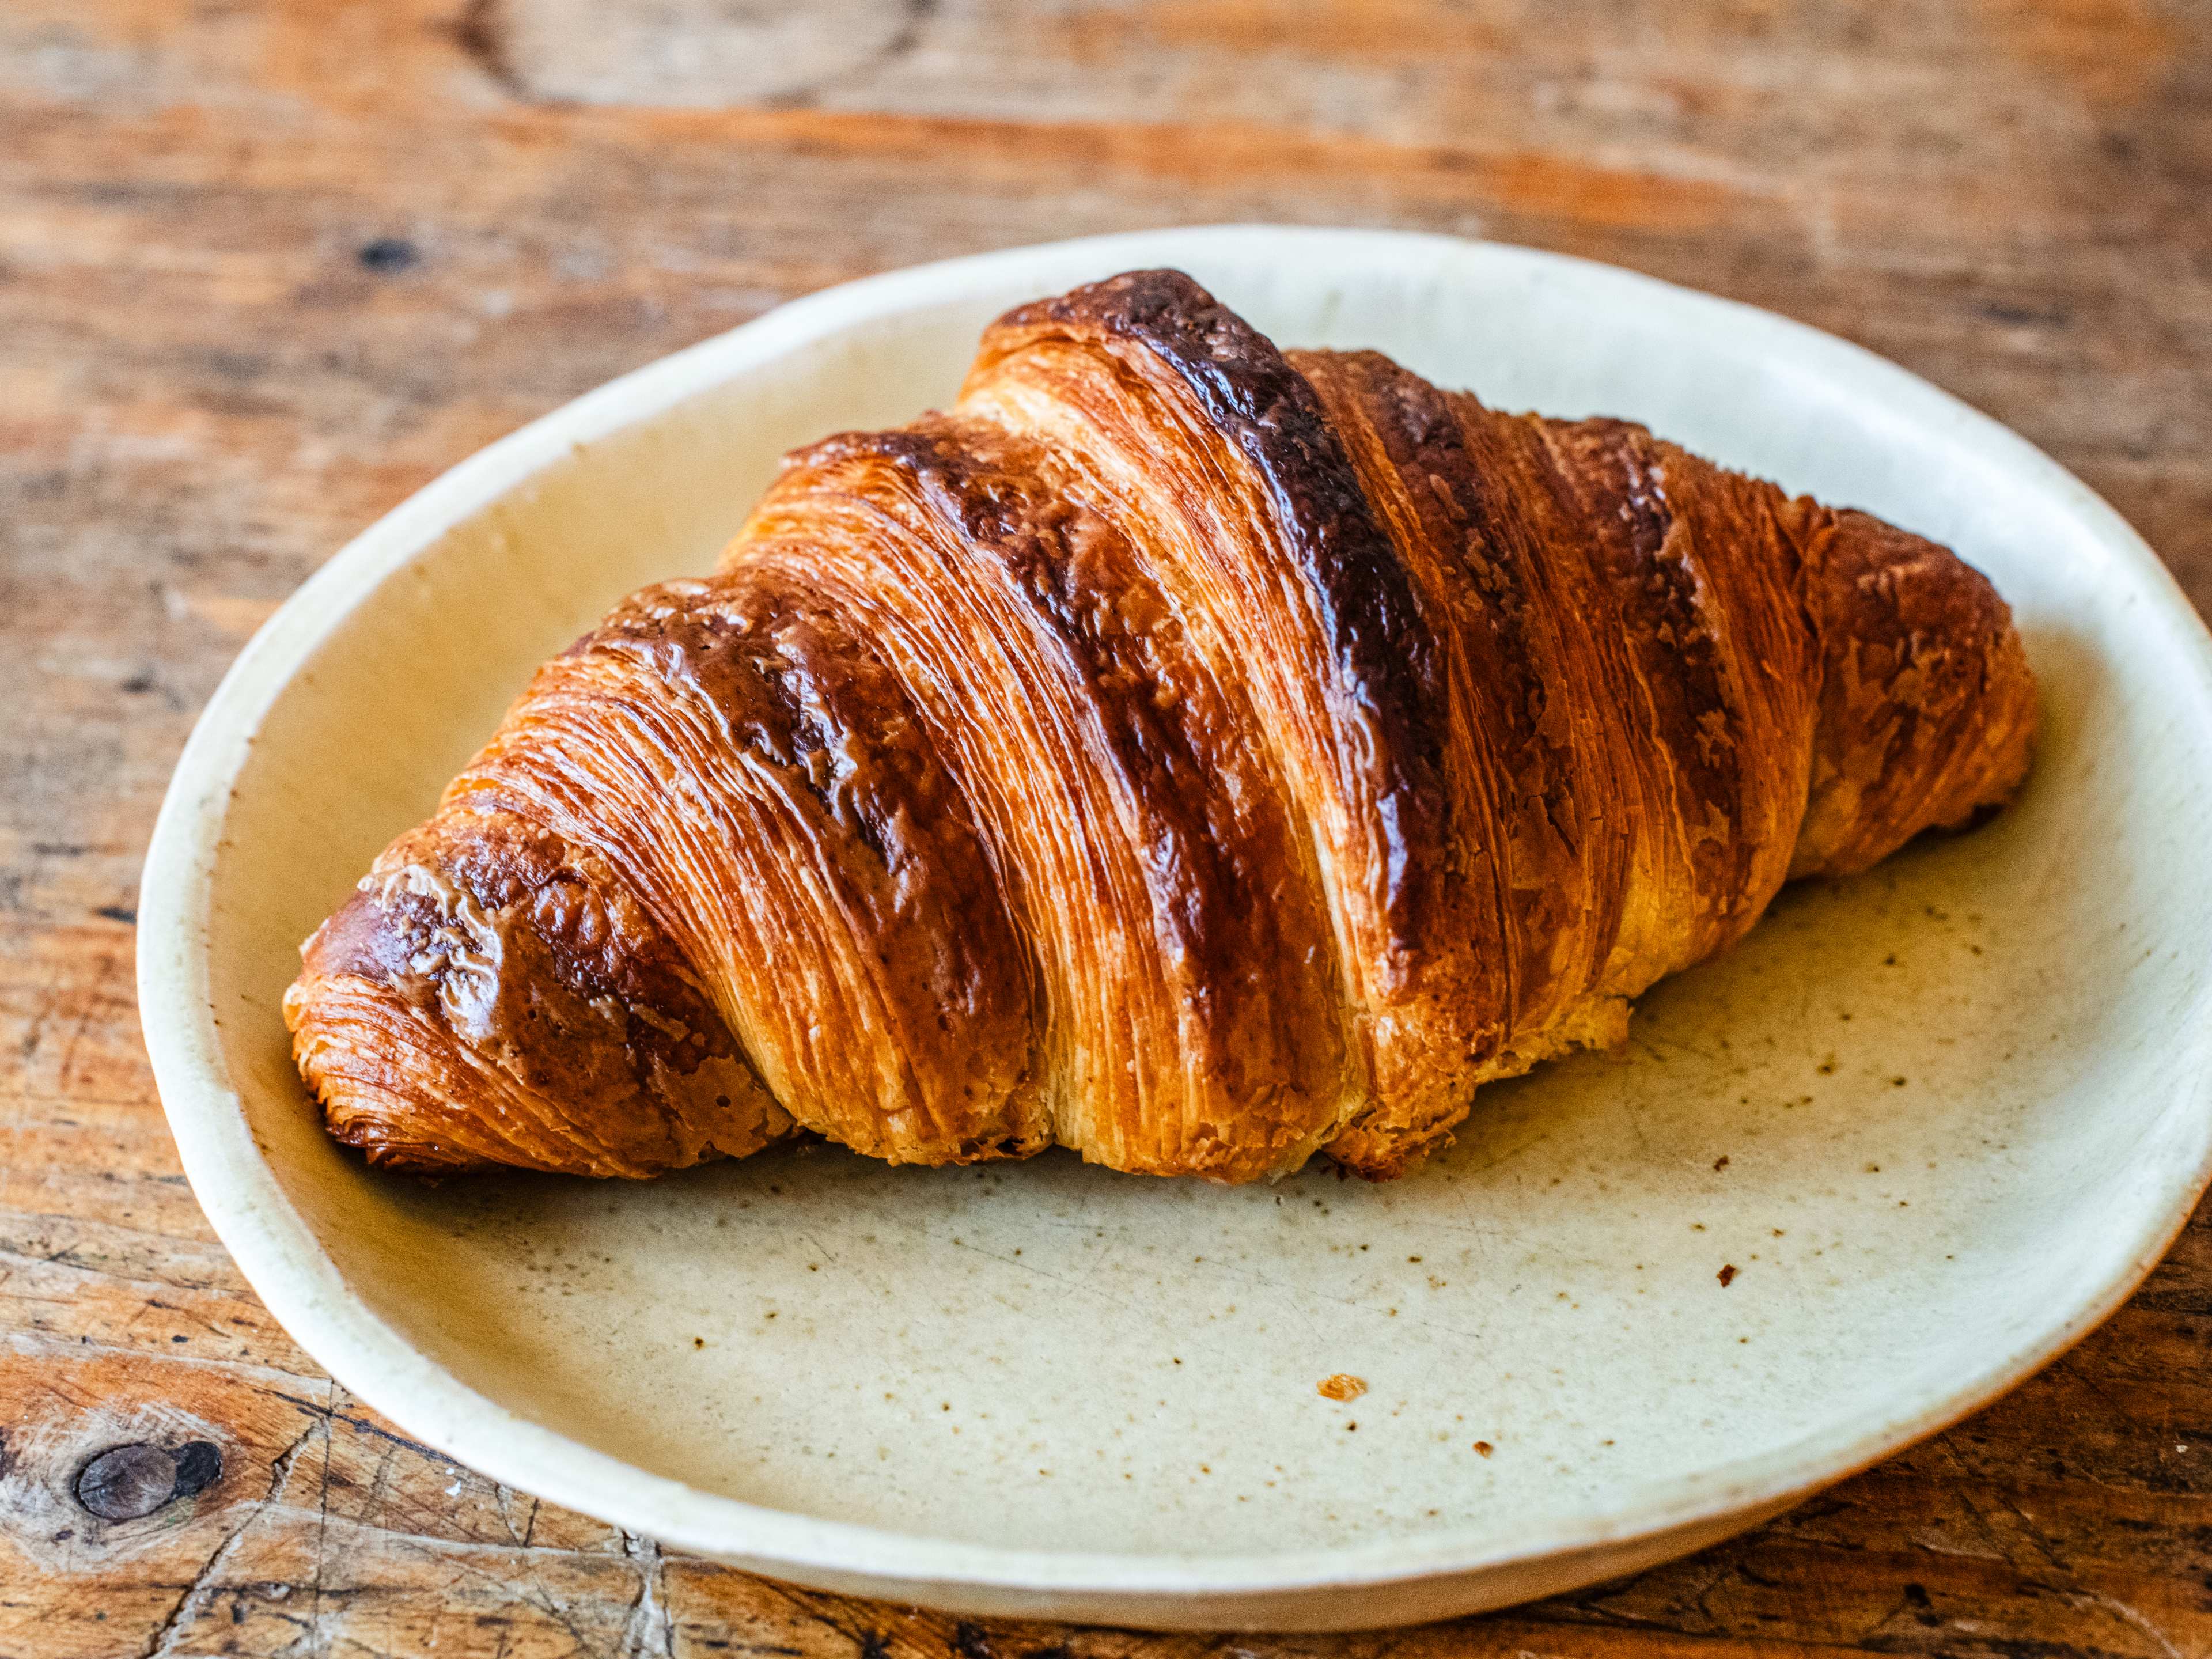 A croissant from Tarn Bakery.